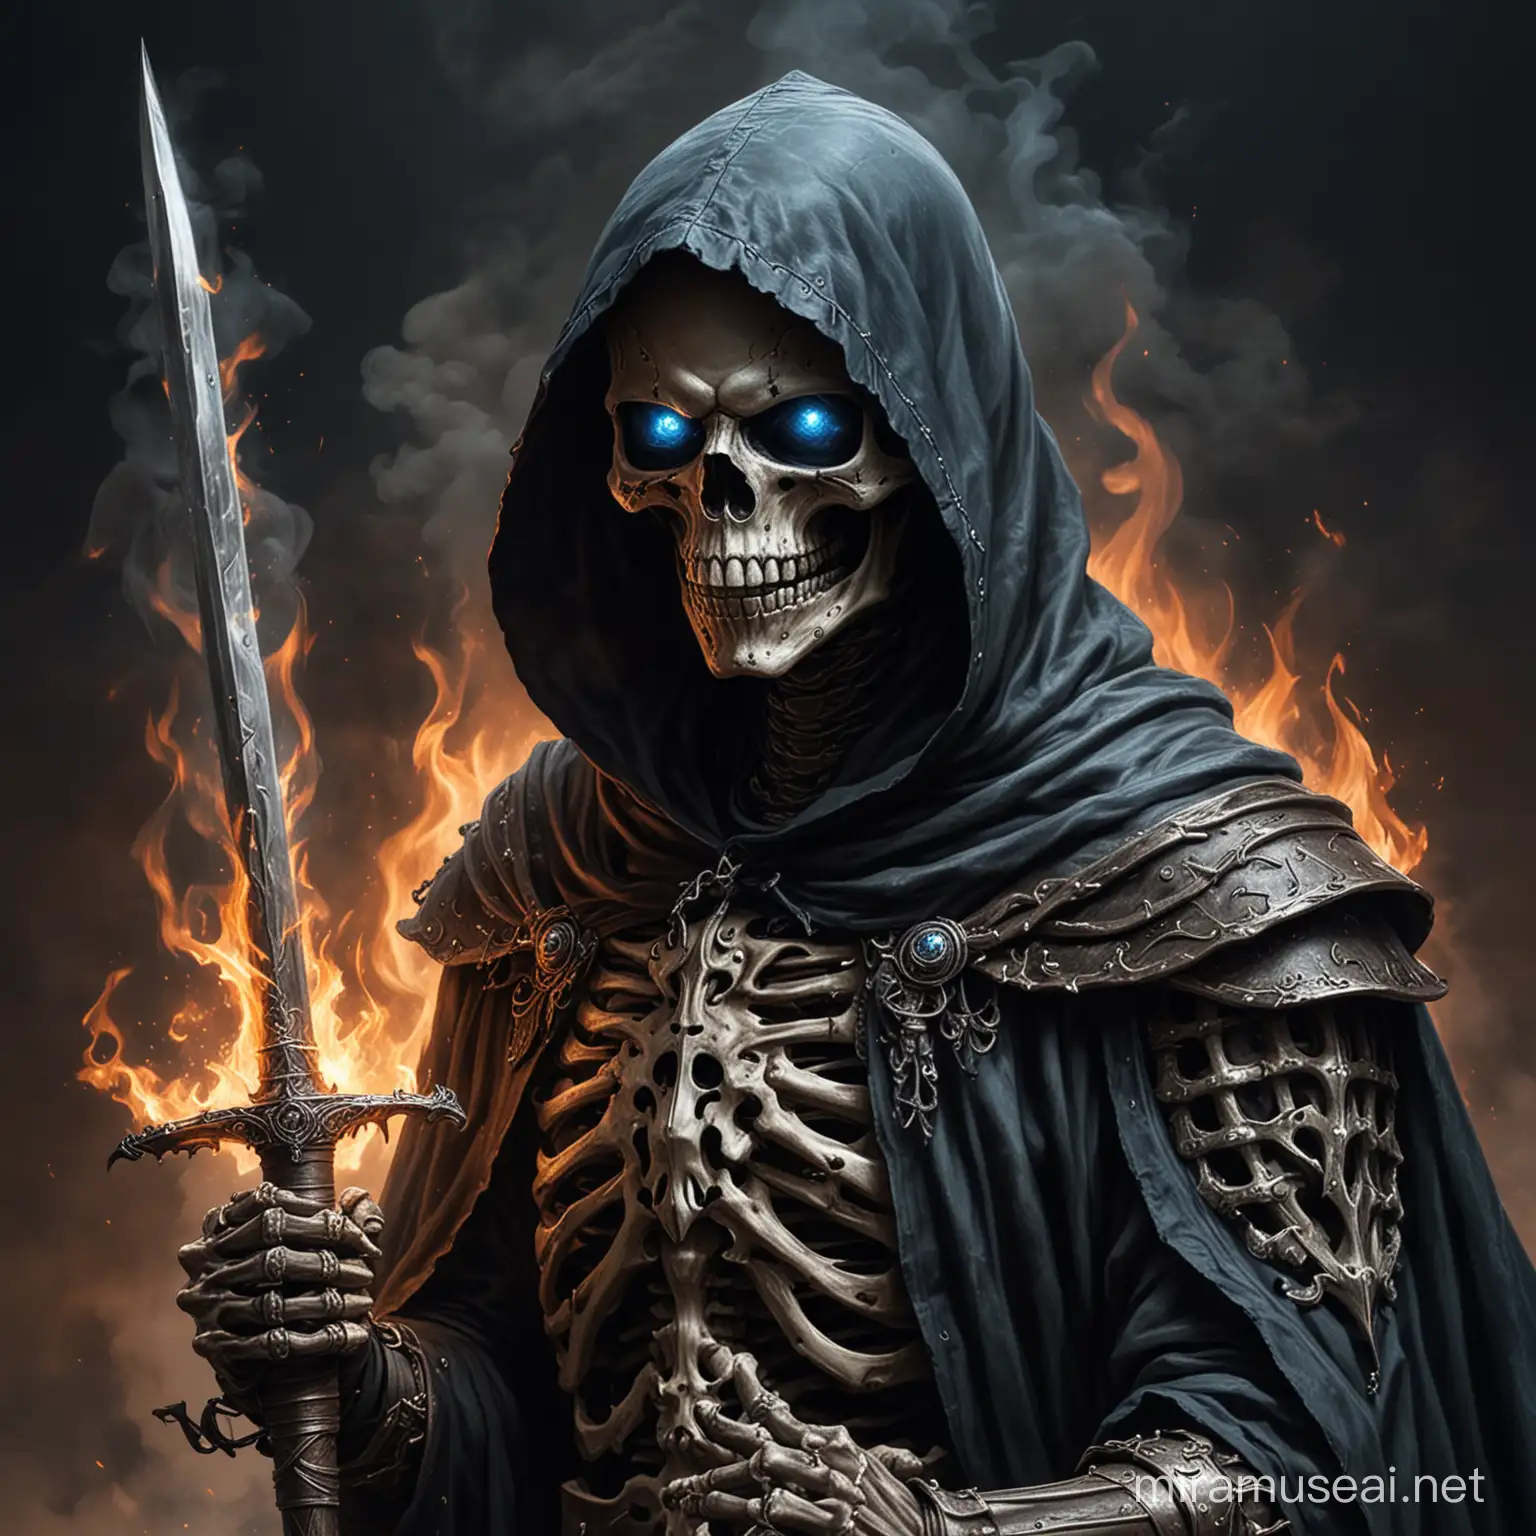 Mysterious Skeleton Warrior with Glowing Blue Eyes and Rapier